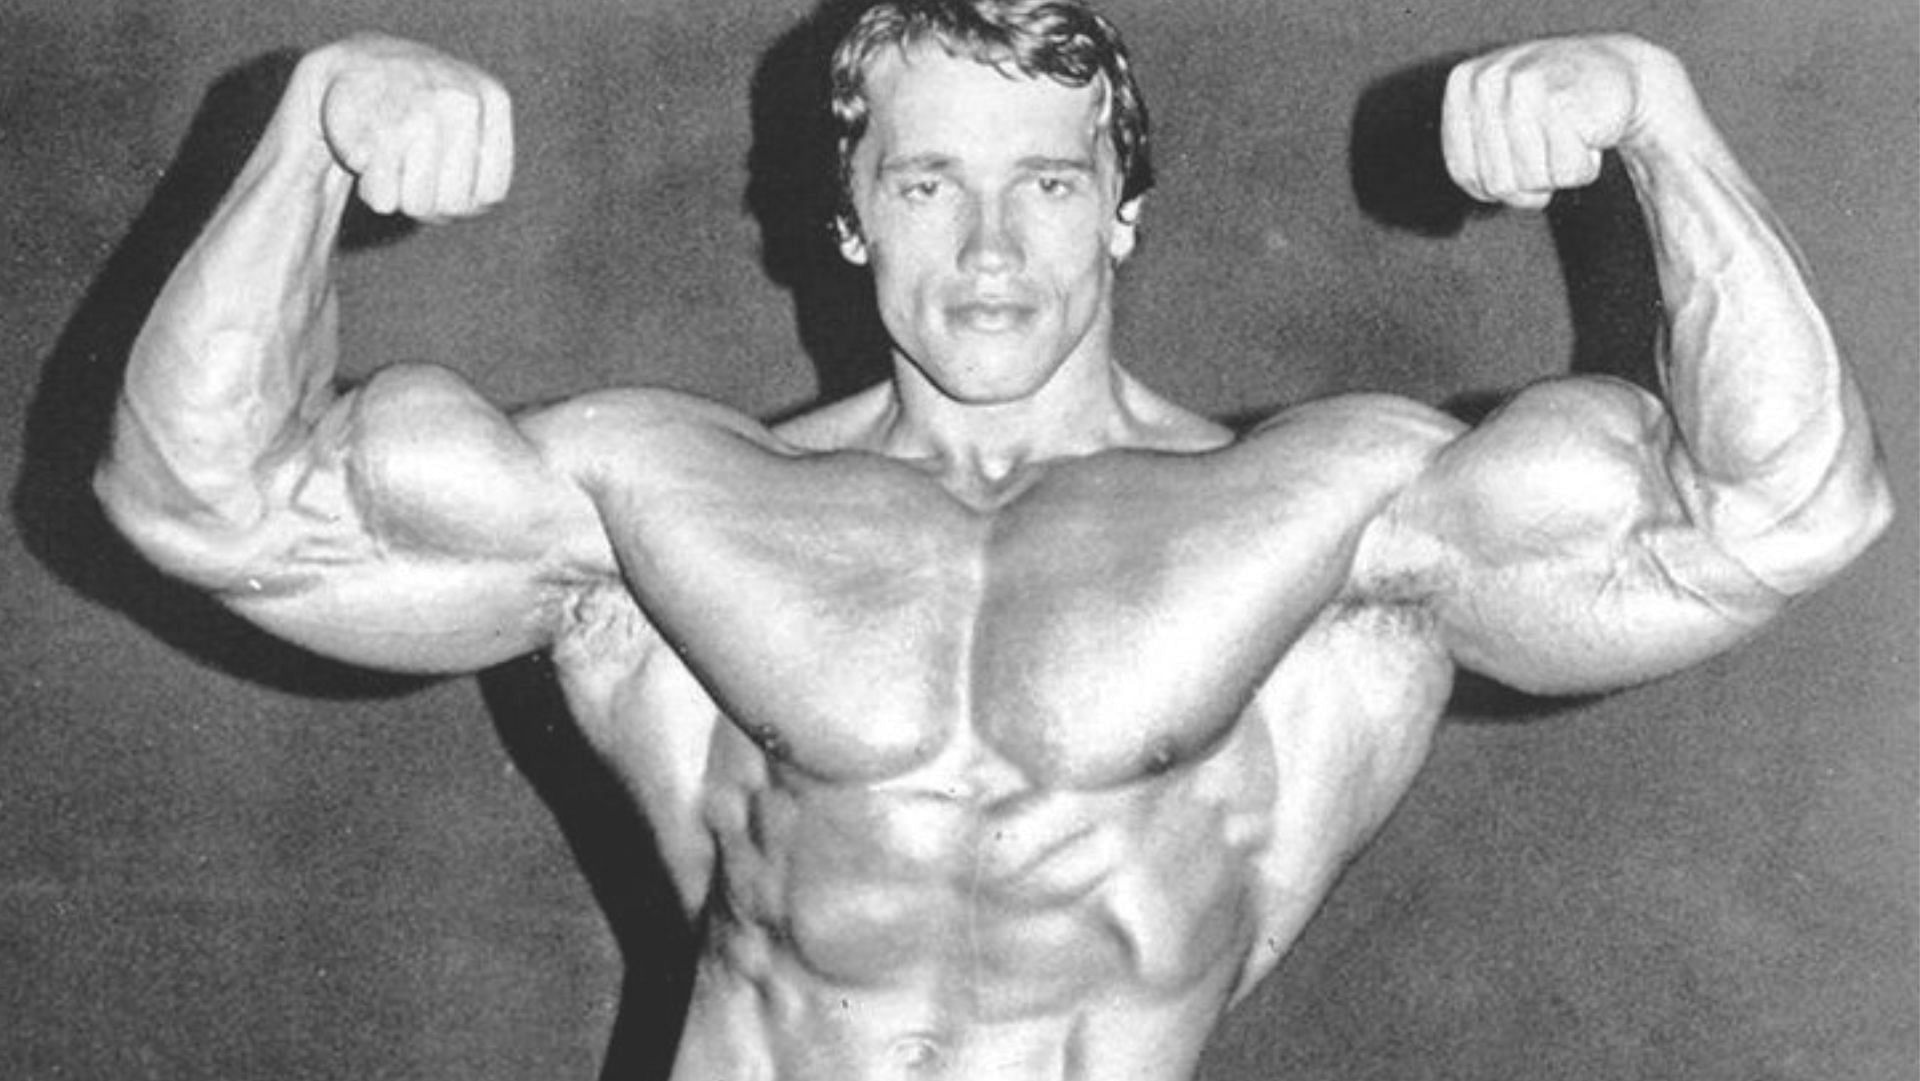 What Was Arnold Schwarzenegger's Ultimate Arms Workout Routine?